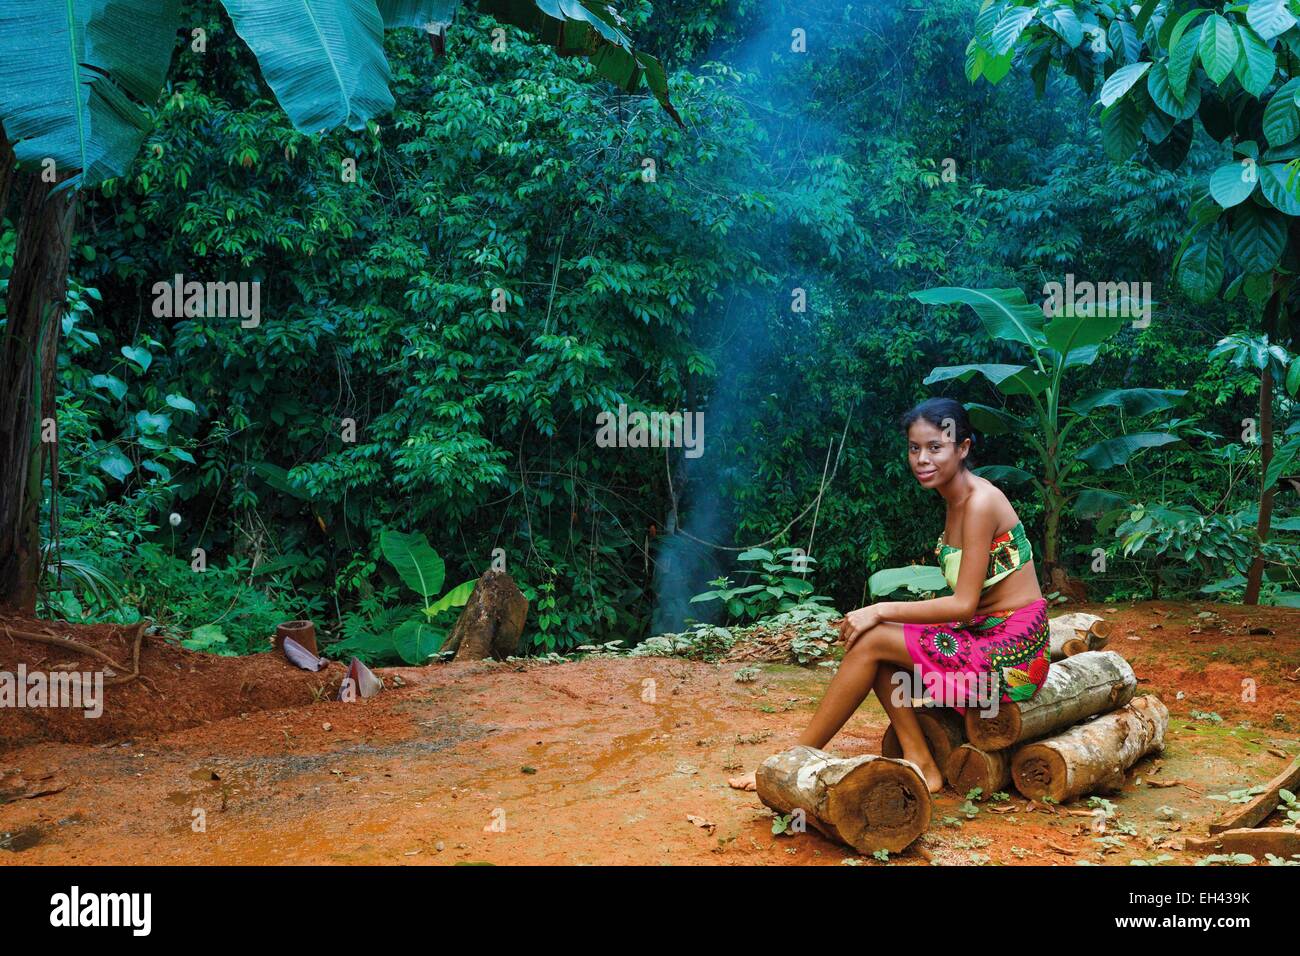 Panama, Darien province, Darien National Park, listed as World Heritage by UNESCO, Embera indigenous community, portrait of a young native girl Embera in a lush tropical vegetation Stock Photo